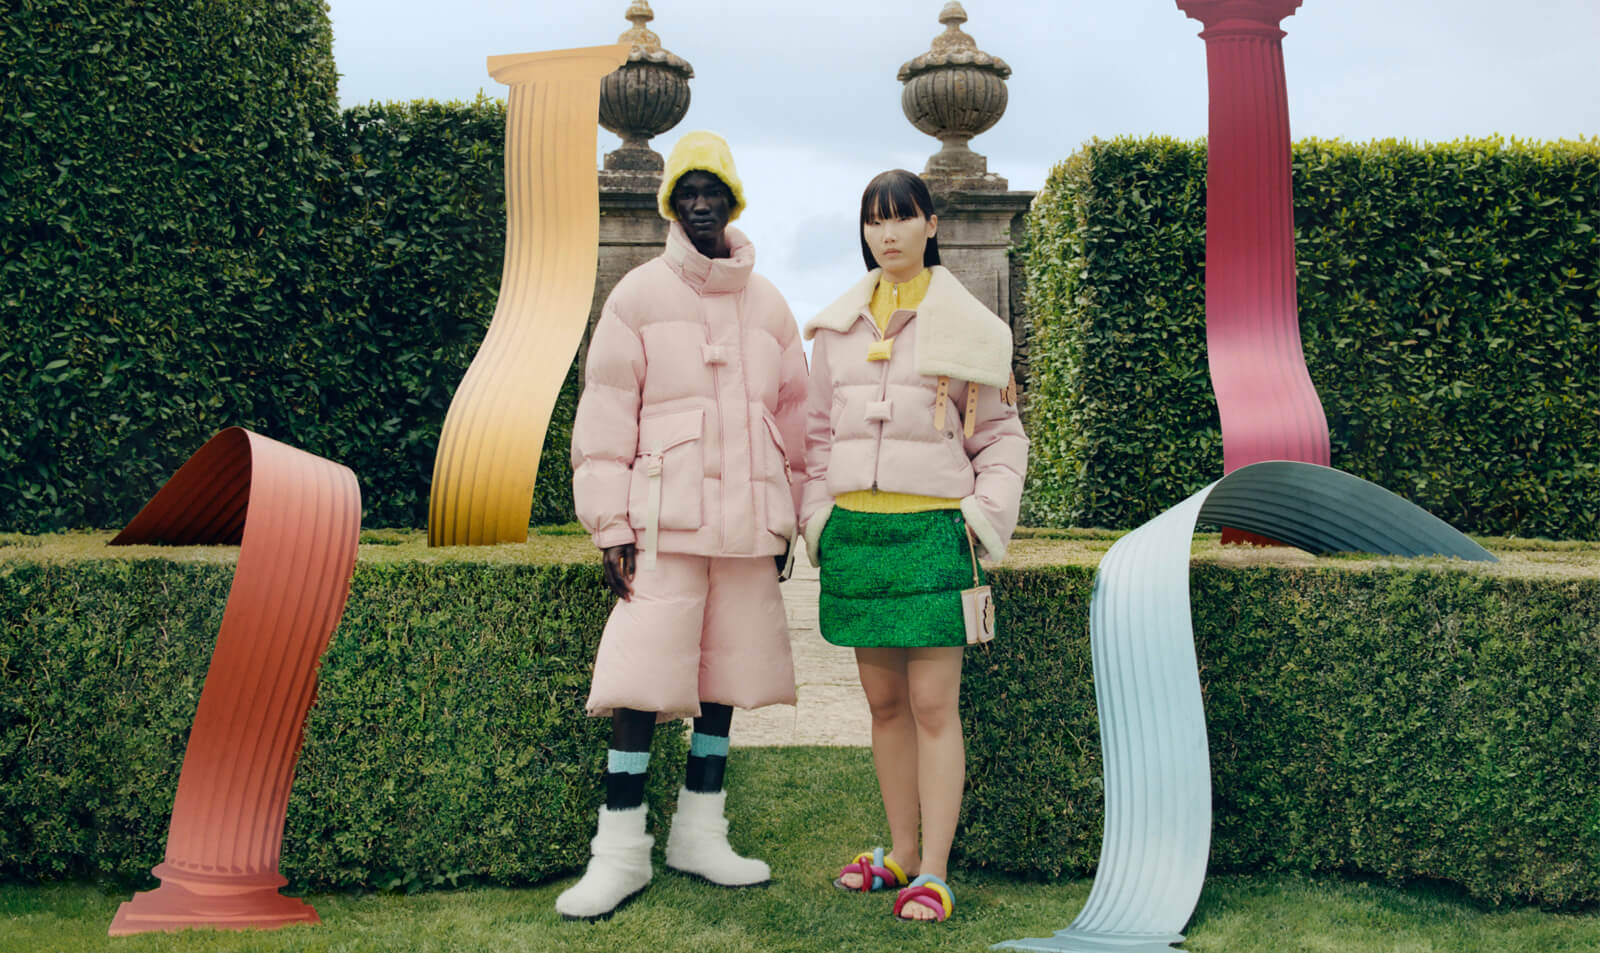 1 MONCLER JW ANDERSON “Dream in color”